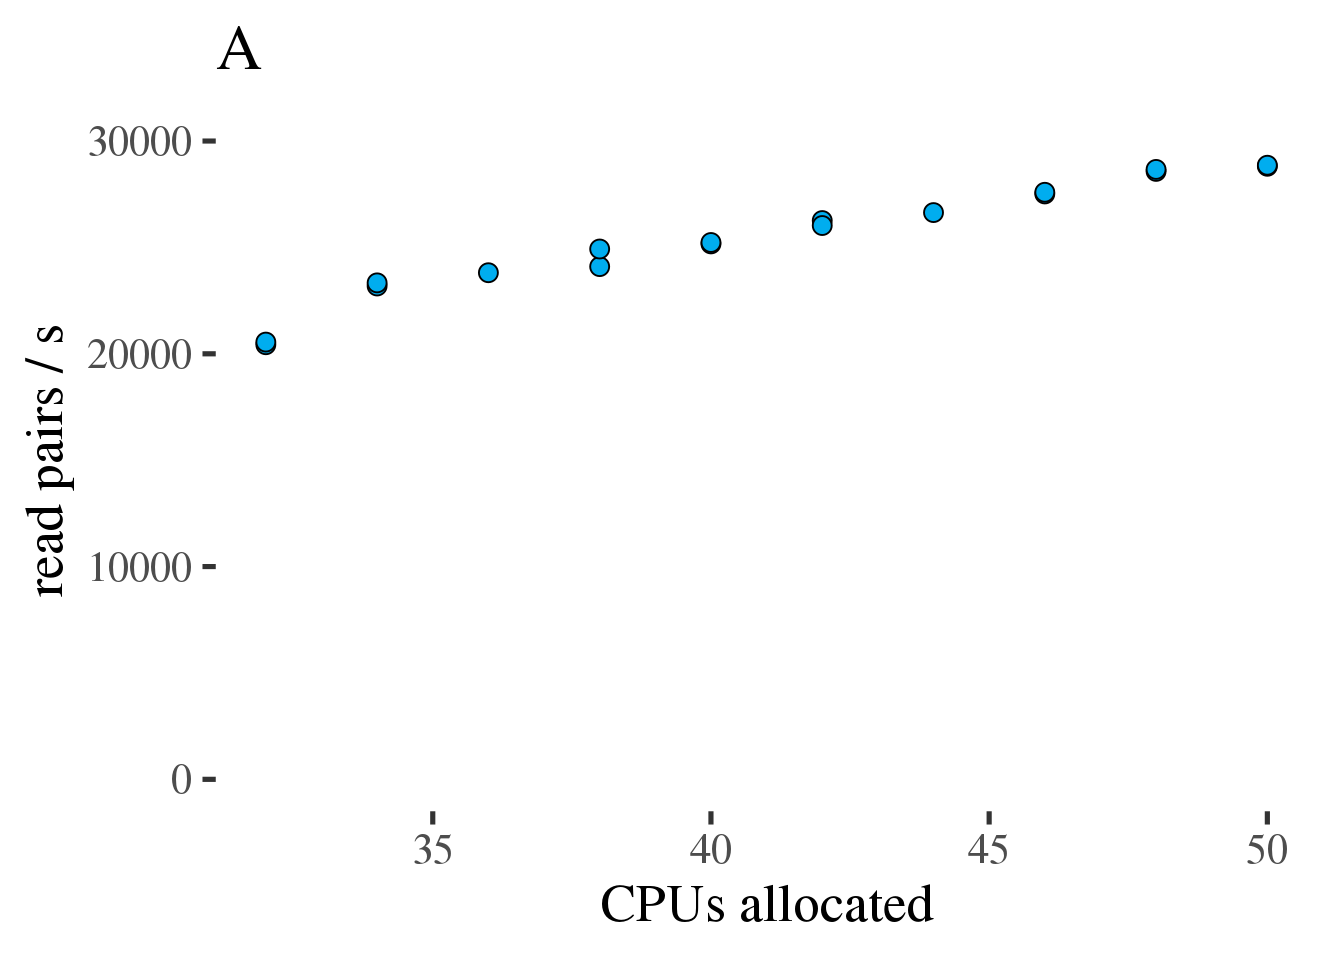 (A) Gross throughput in reads/s of the combined preprocessing pipeline from FASTQ to alignments in a BAM file. The total thread count across all three tools. (B) Like the plot on the left but showing Reads/s/cpu, a measure of efficiency.